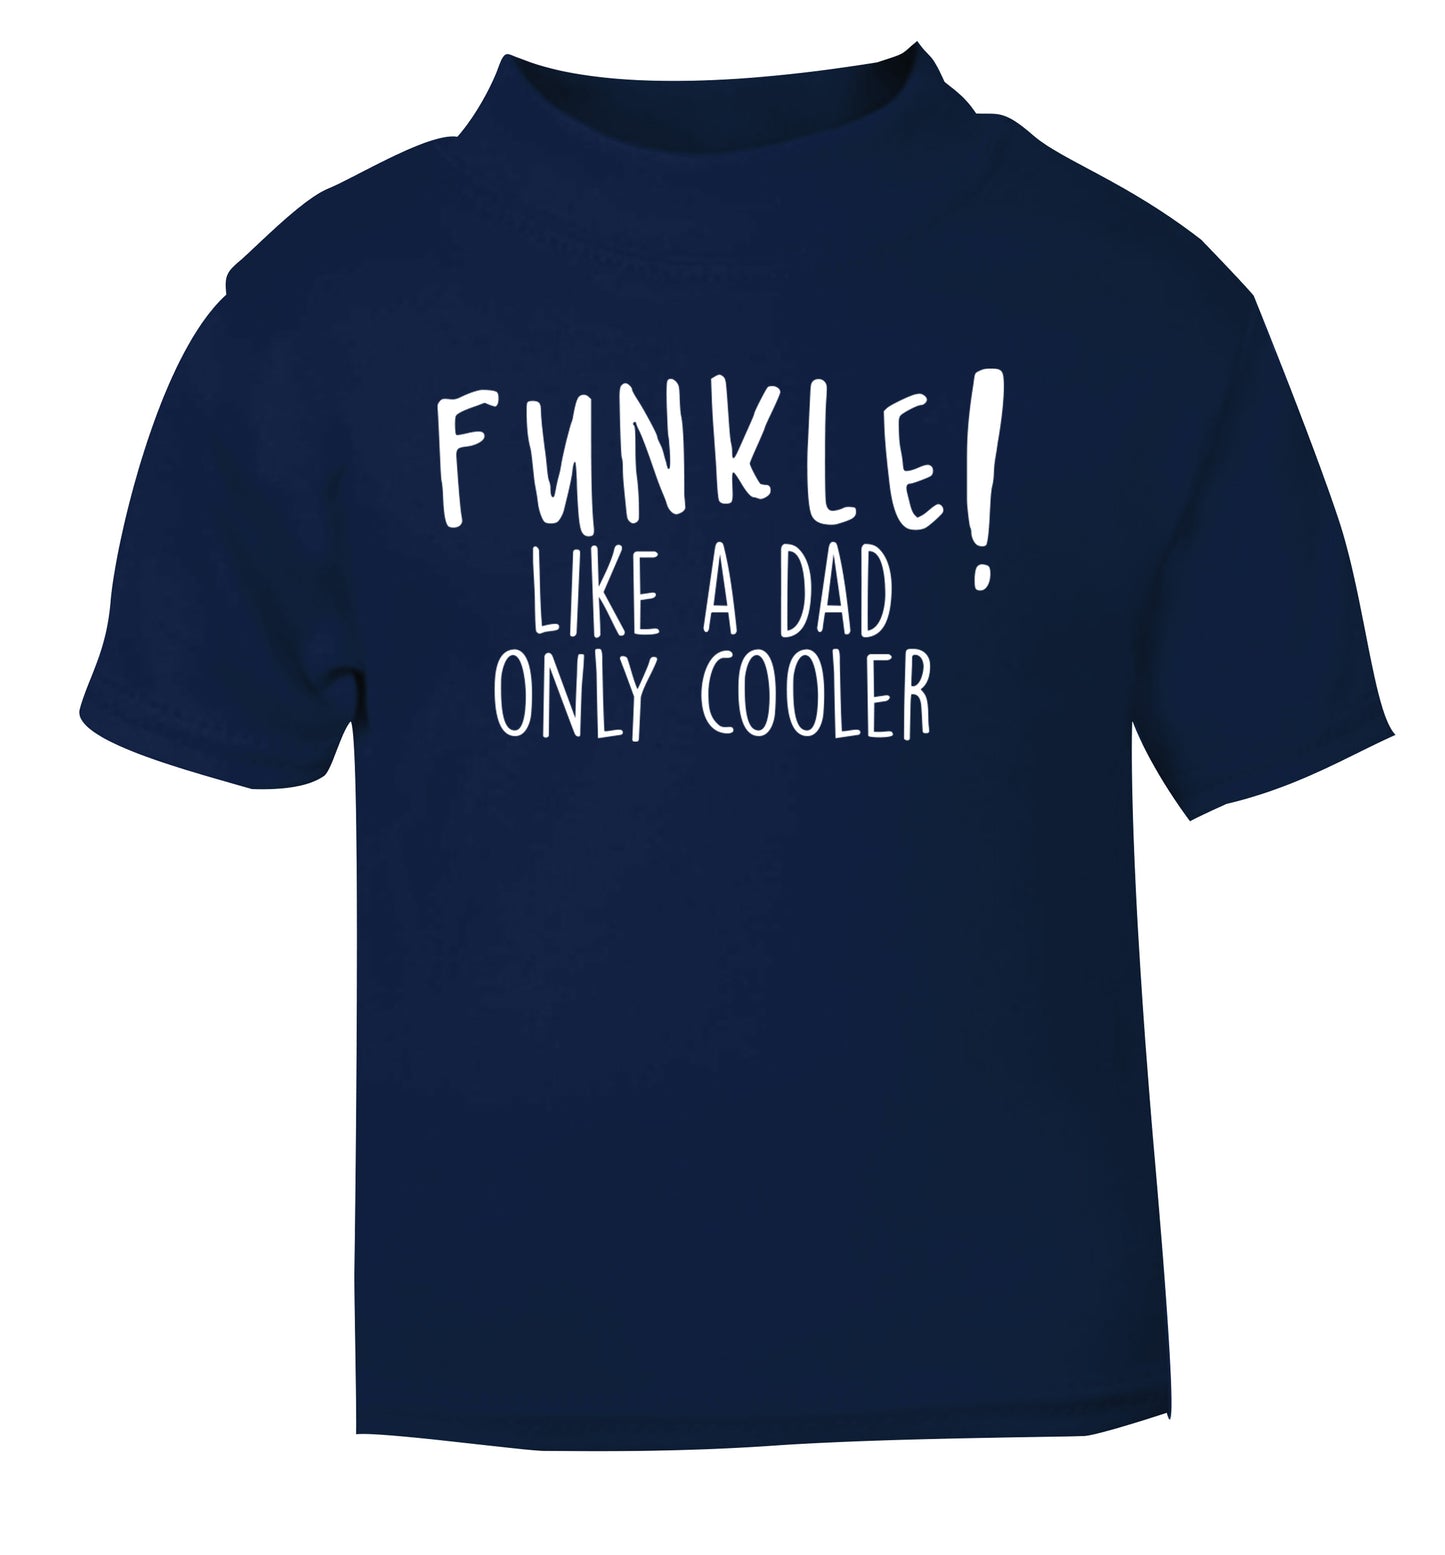 Funkle Like a Dad Only Cooler navy Baby Toddler Tshirt 2 Years